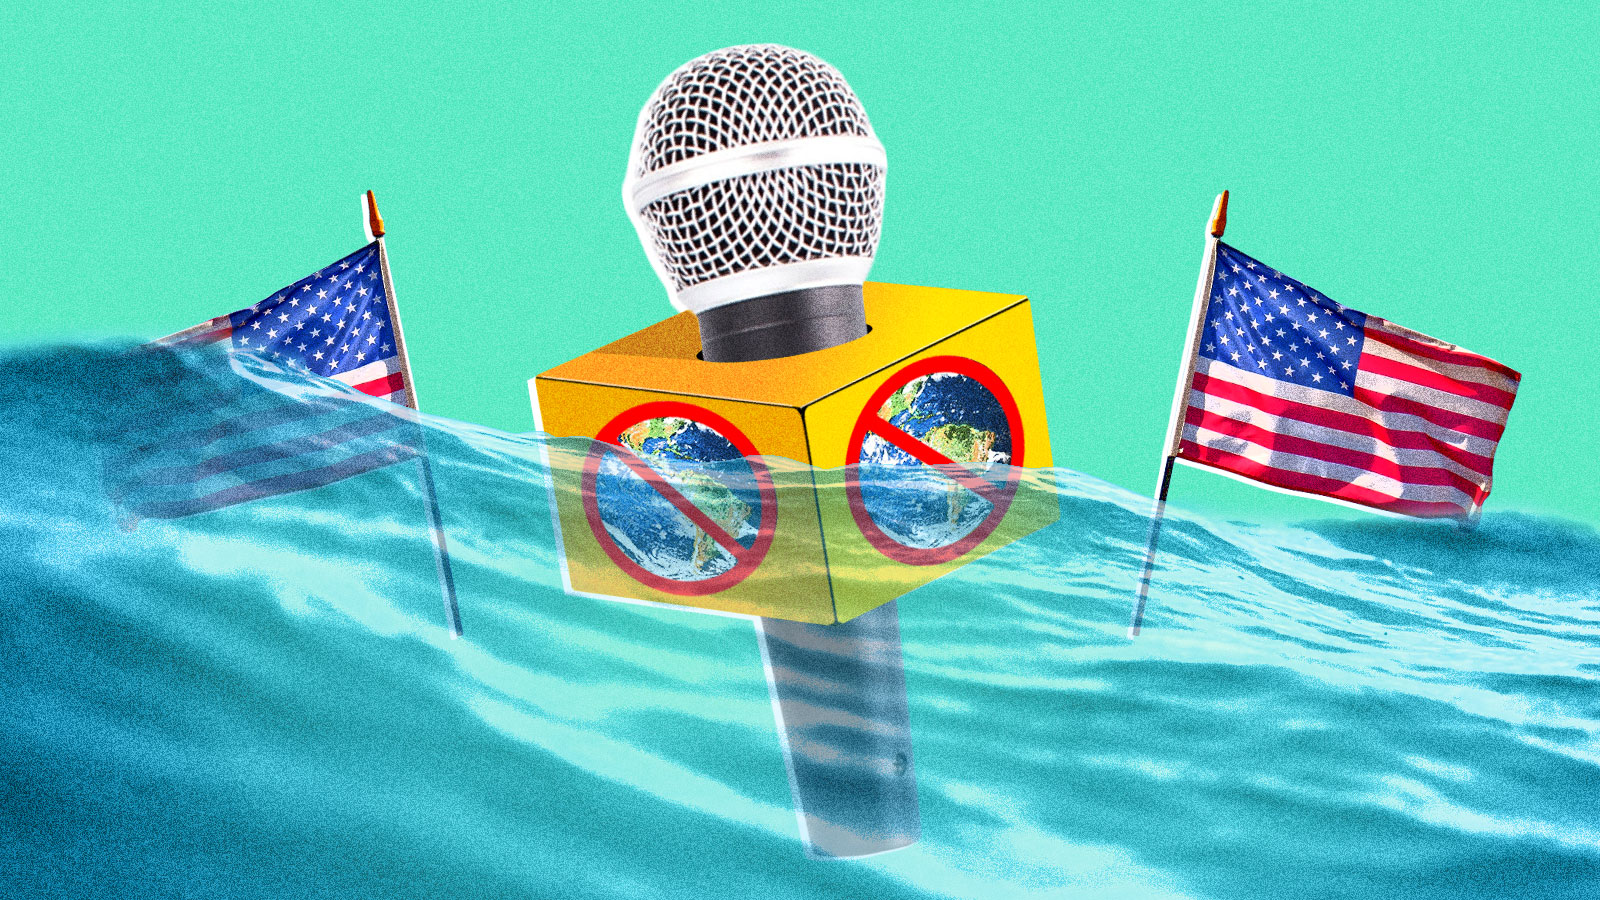 A microphone with the earth crossed out on it and two American flags underwater